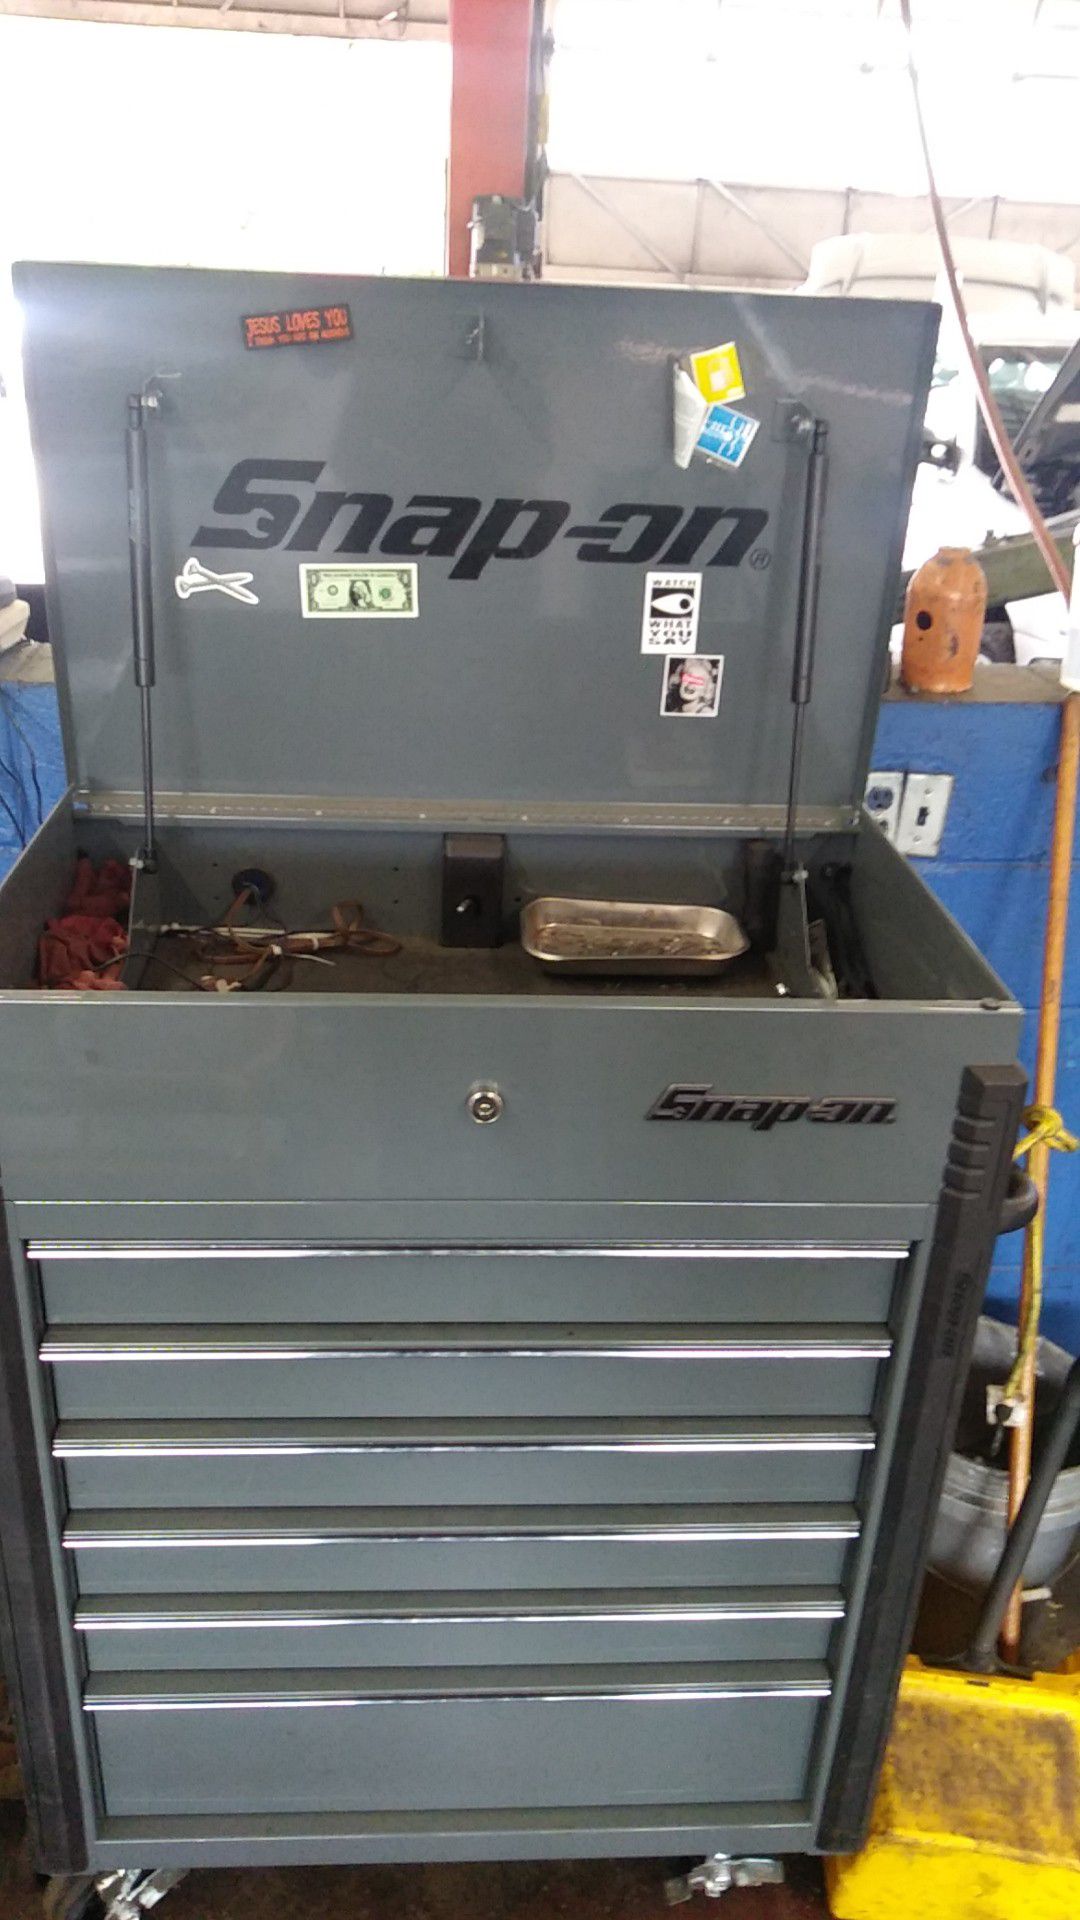 Snap on starter box and Snap on tools.